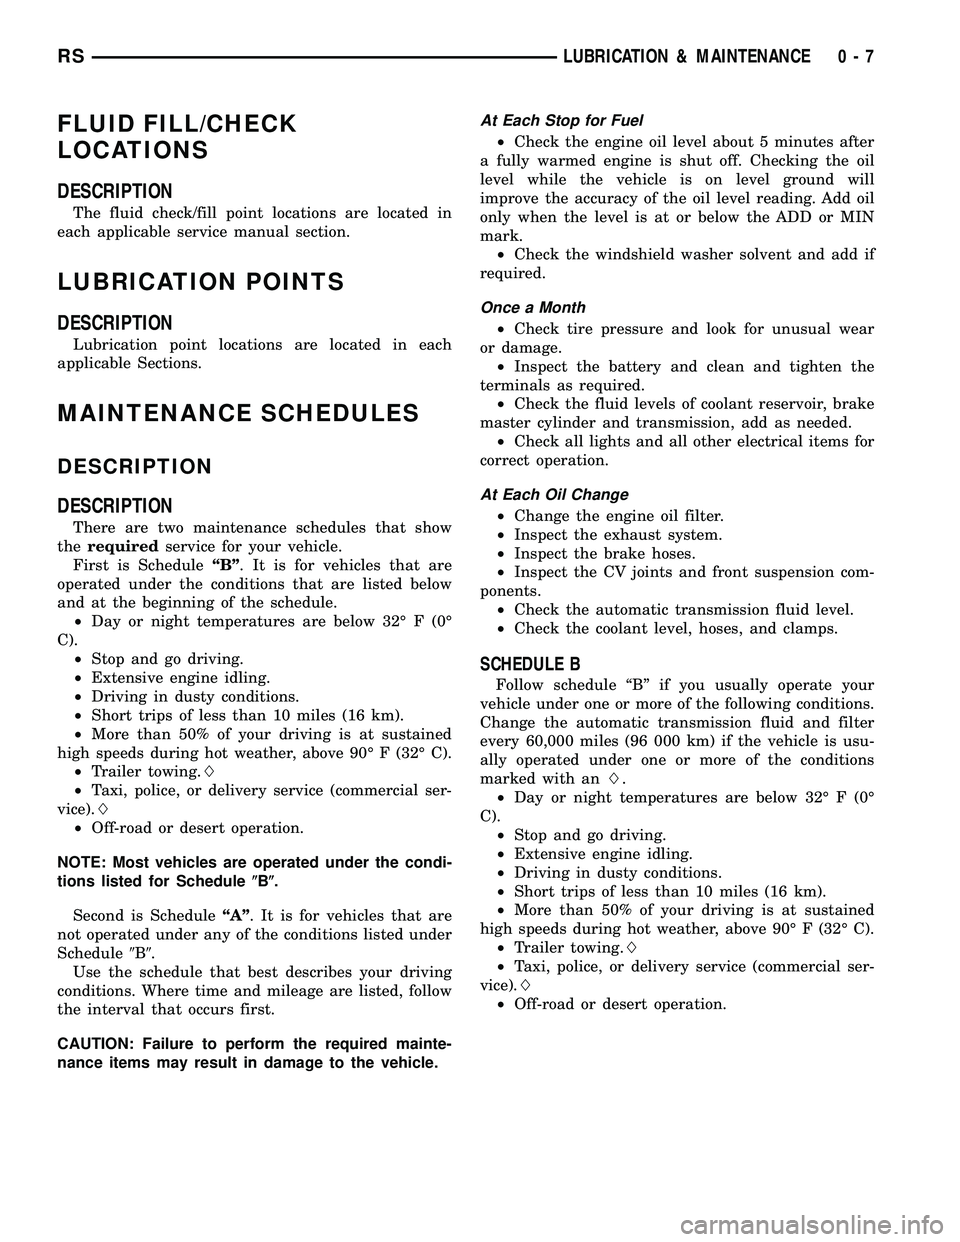 CHRYSLER CARAVAN 2005 User Guide FLUID FILL/CHECK
LOCATIONS
DESCRIPTION
The fluid check/fill point locations are located in
each applicable service manual section.
LUBRICATION POINTS
DESCRIPTION
Lubrication point locations are locate